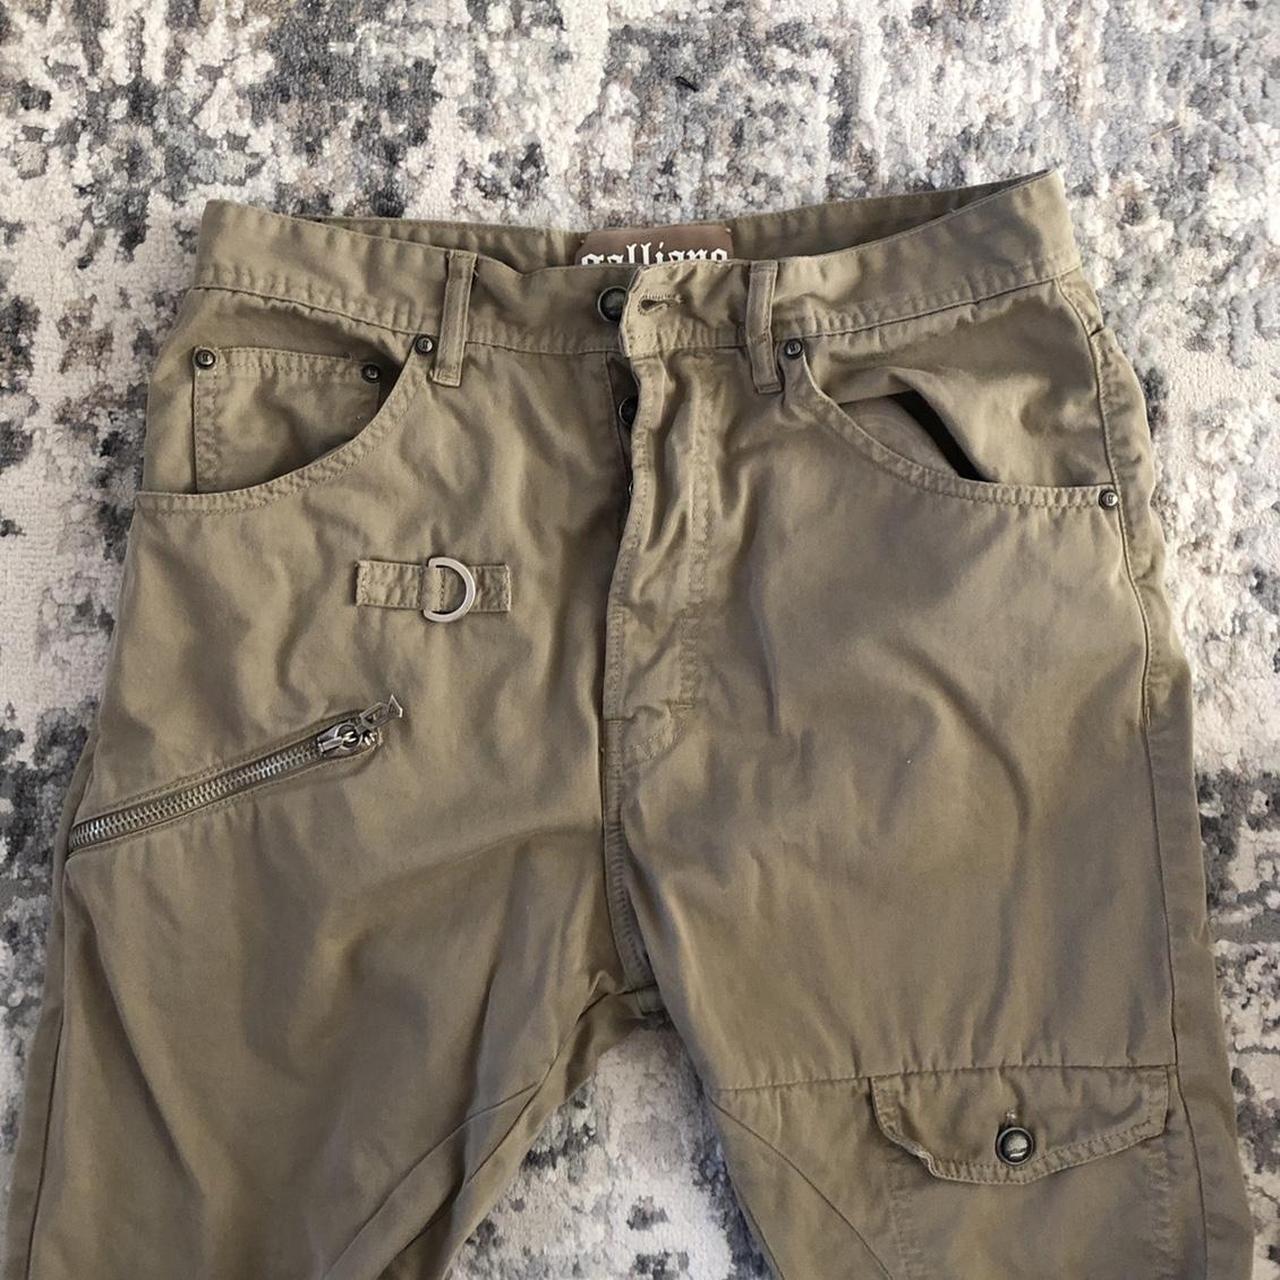 Galliano Men's Tan and Black Trousers (2)